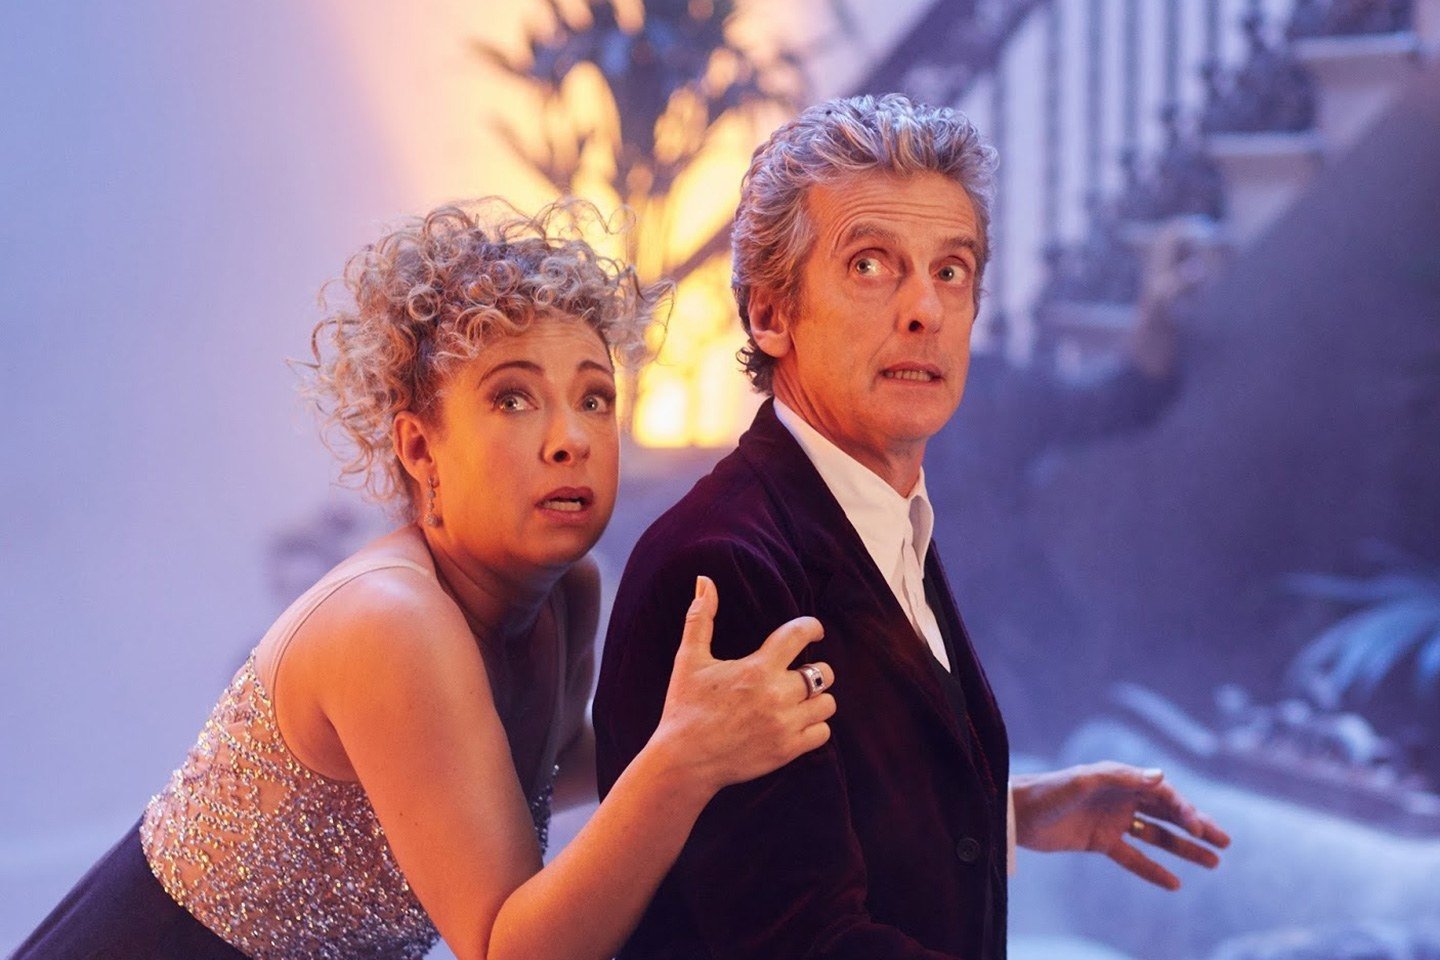 Emily Cook Announces New Doctor Who Lockdown, Starting with The Husbands of River Song